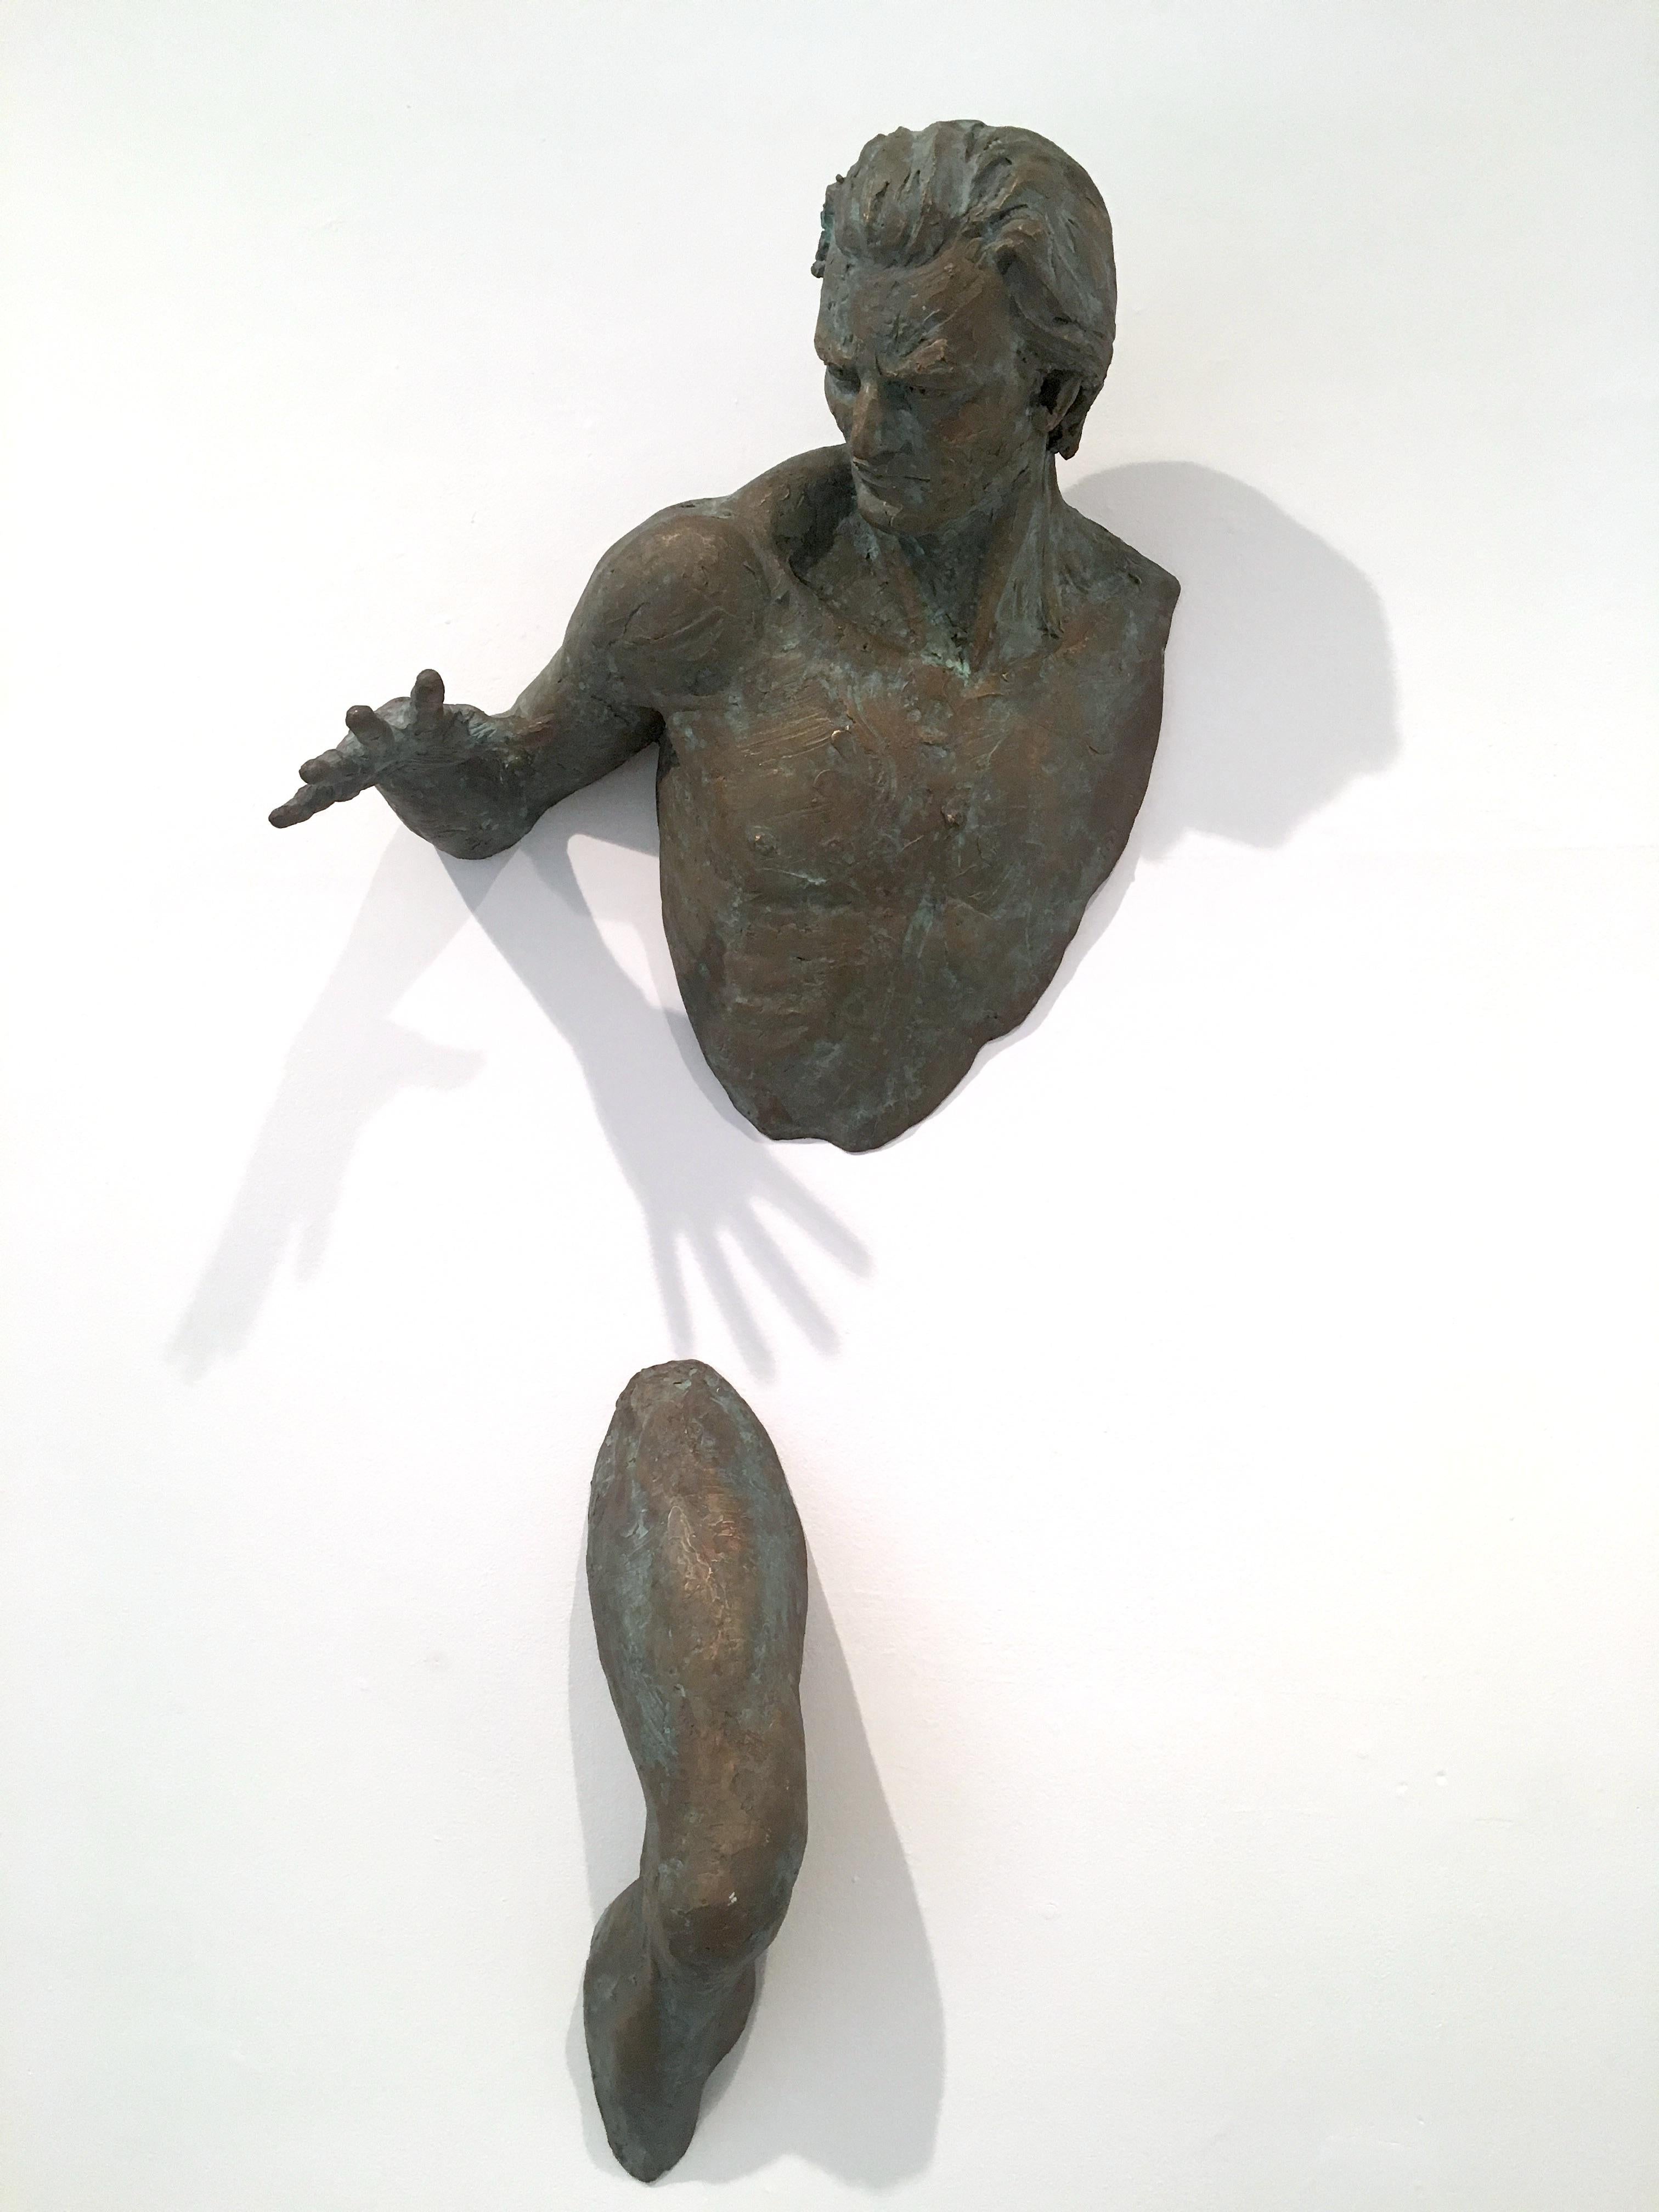 This work consists of two bronze pieces; the upper torso and a leg. Reaching out intensely, the upper body hovers on the wall above the upper thigh, creating the illusion that the sculpture is emerging from the wall.  This work is from the Extra